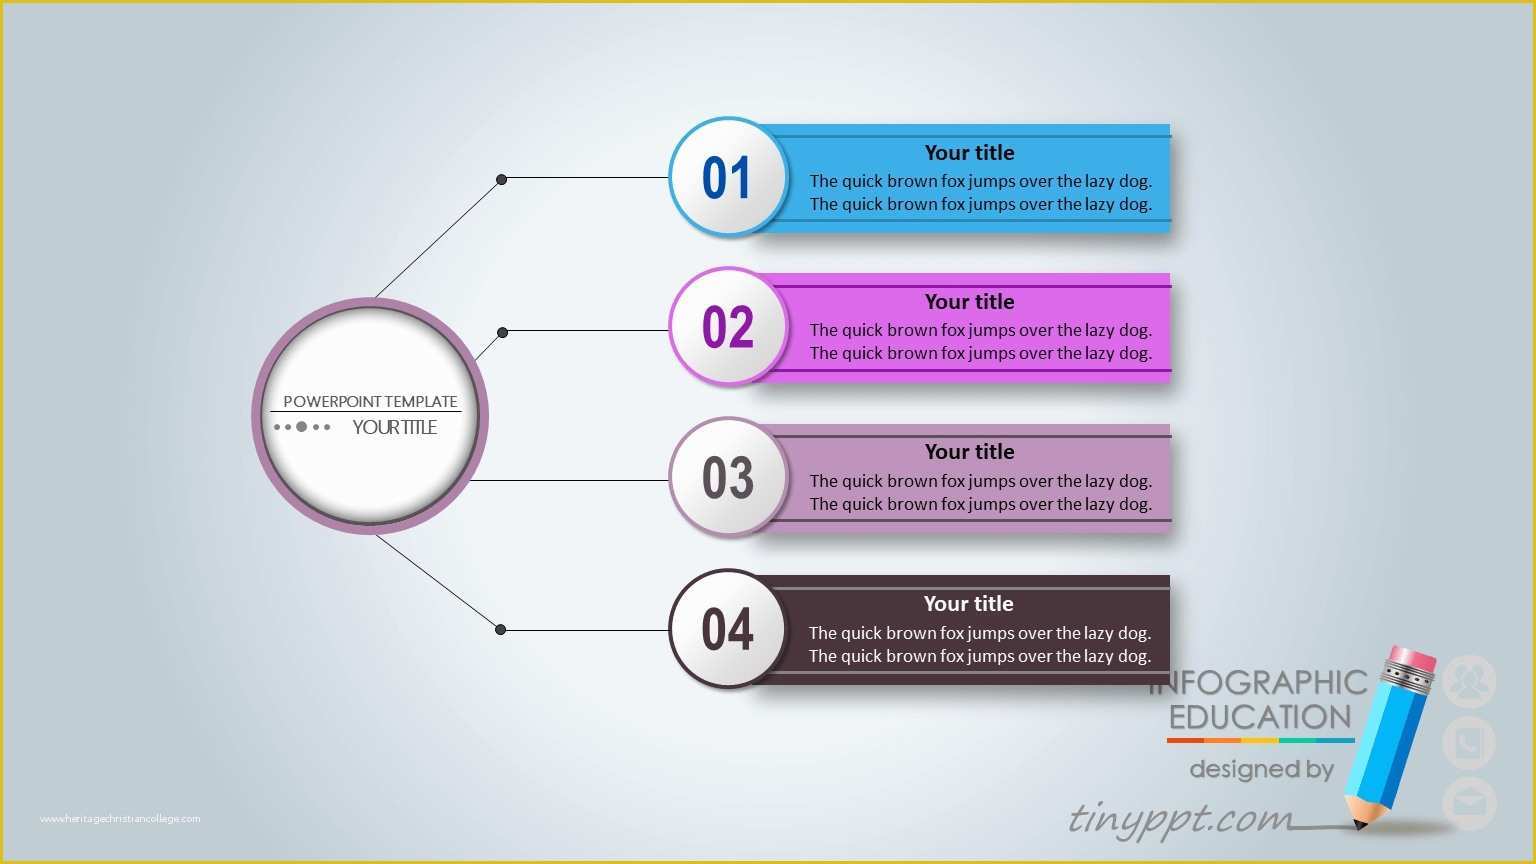 Professional Ppt Templates Free Download for Project Presentation Of Animated Ppt Templates Free Download for Project